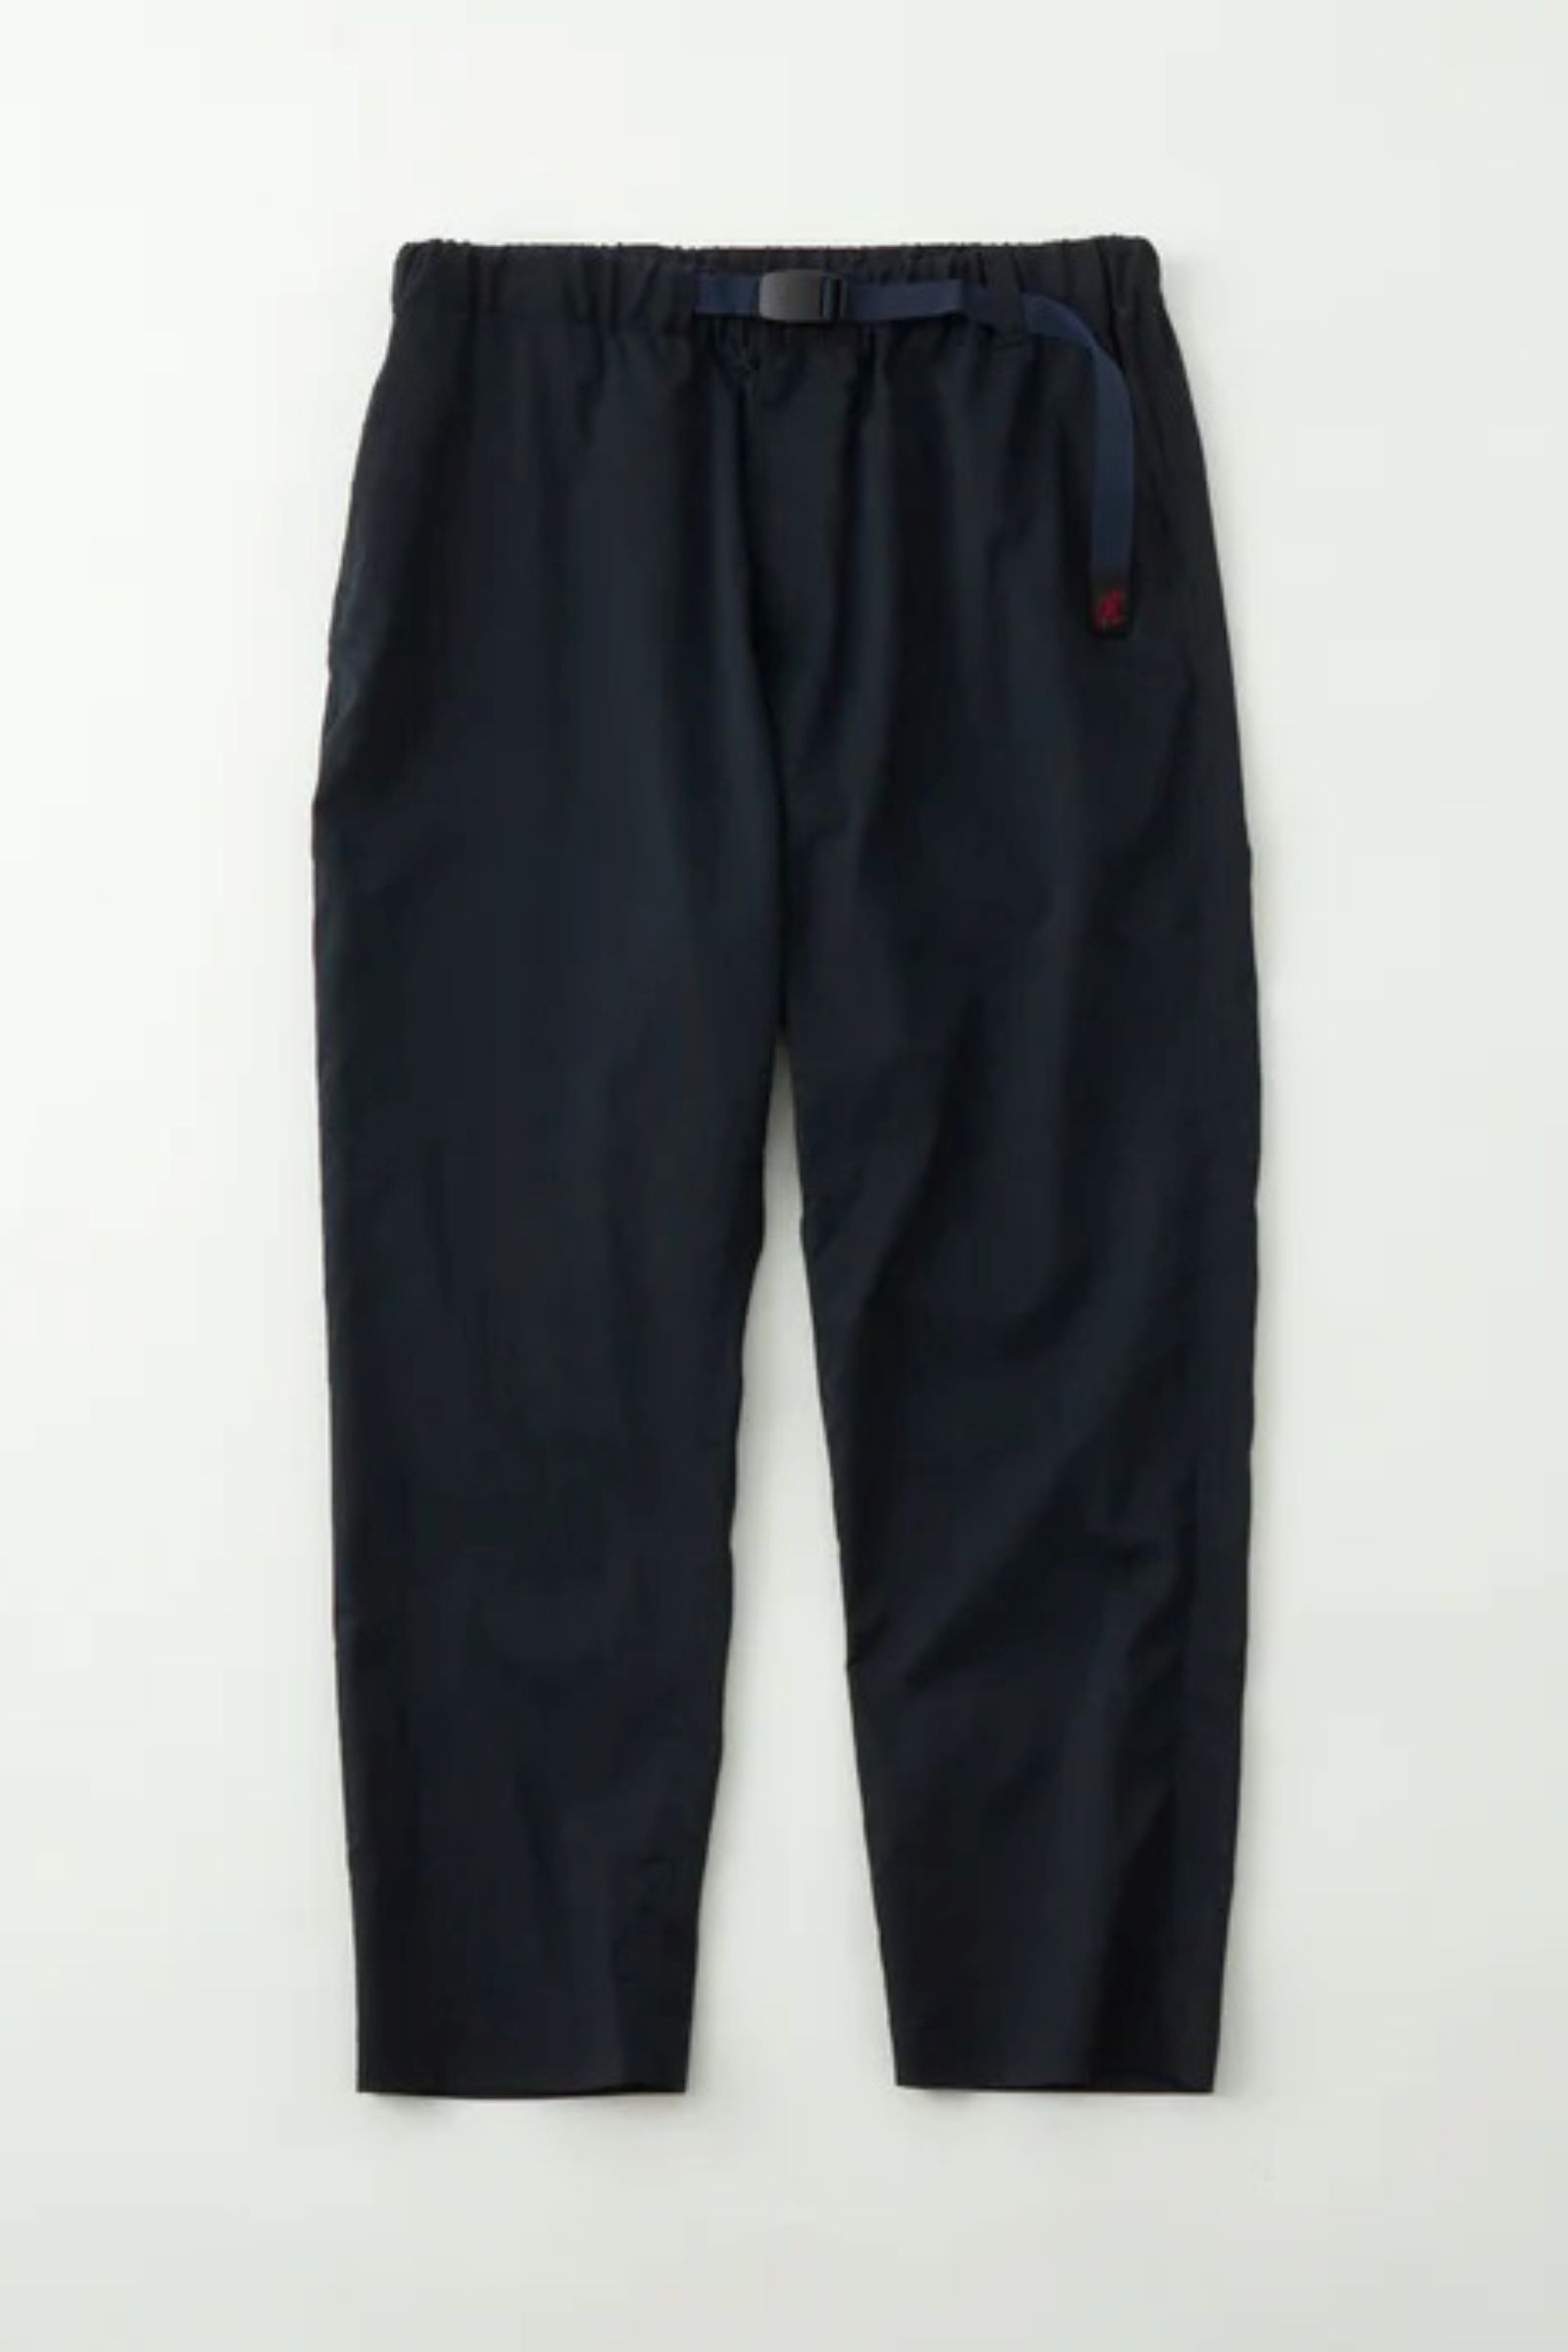 White Mountaineering - wm x gramicci tapered pants -navy- 23ss men